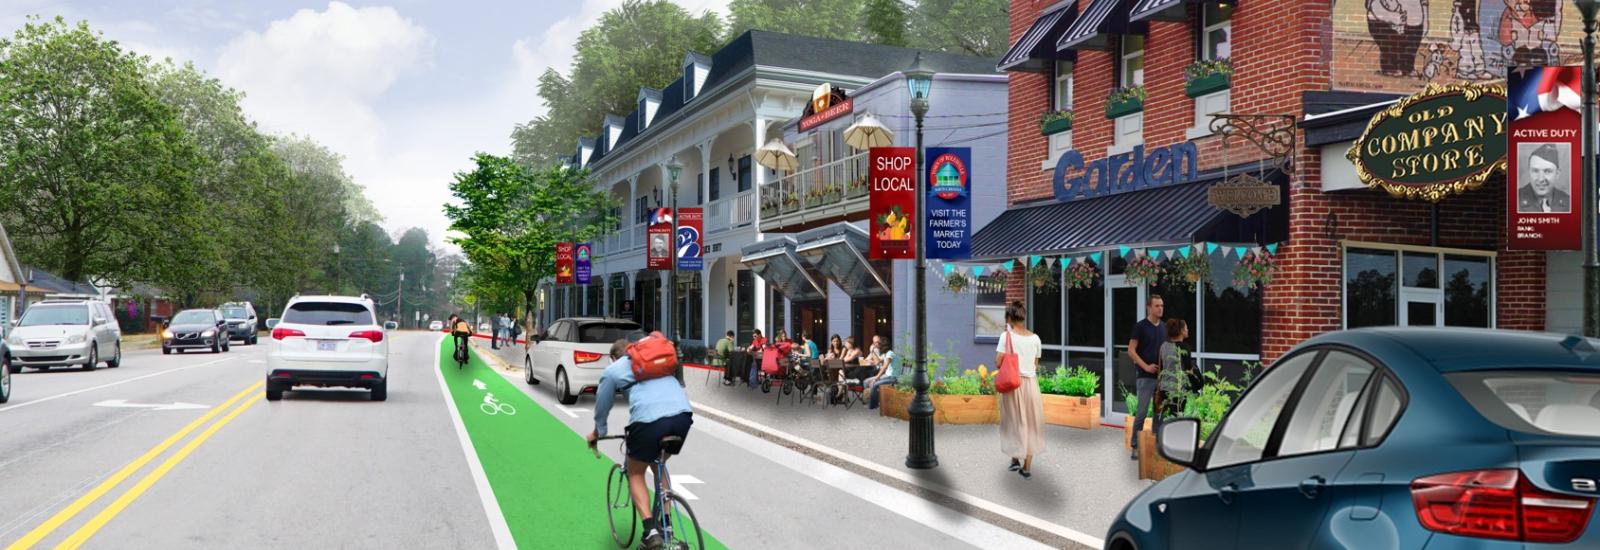 The new downtown district will be mixed-use and pedestrian and bike friendly.